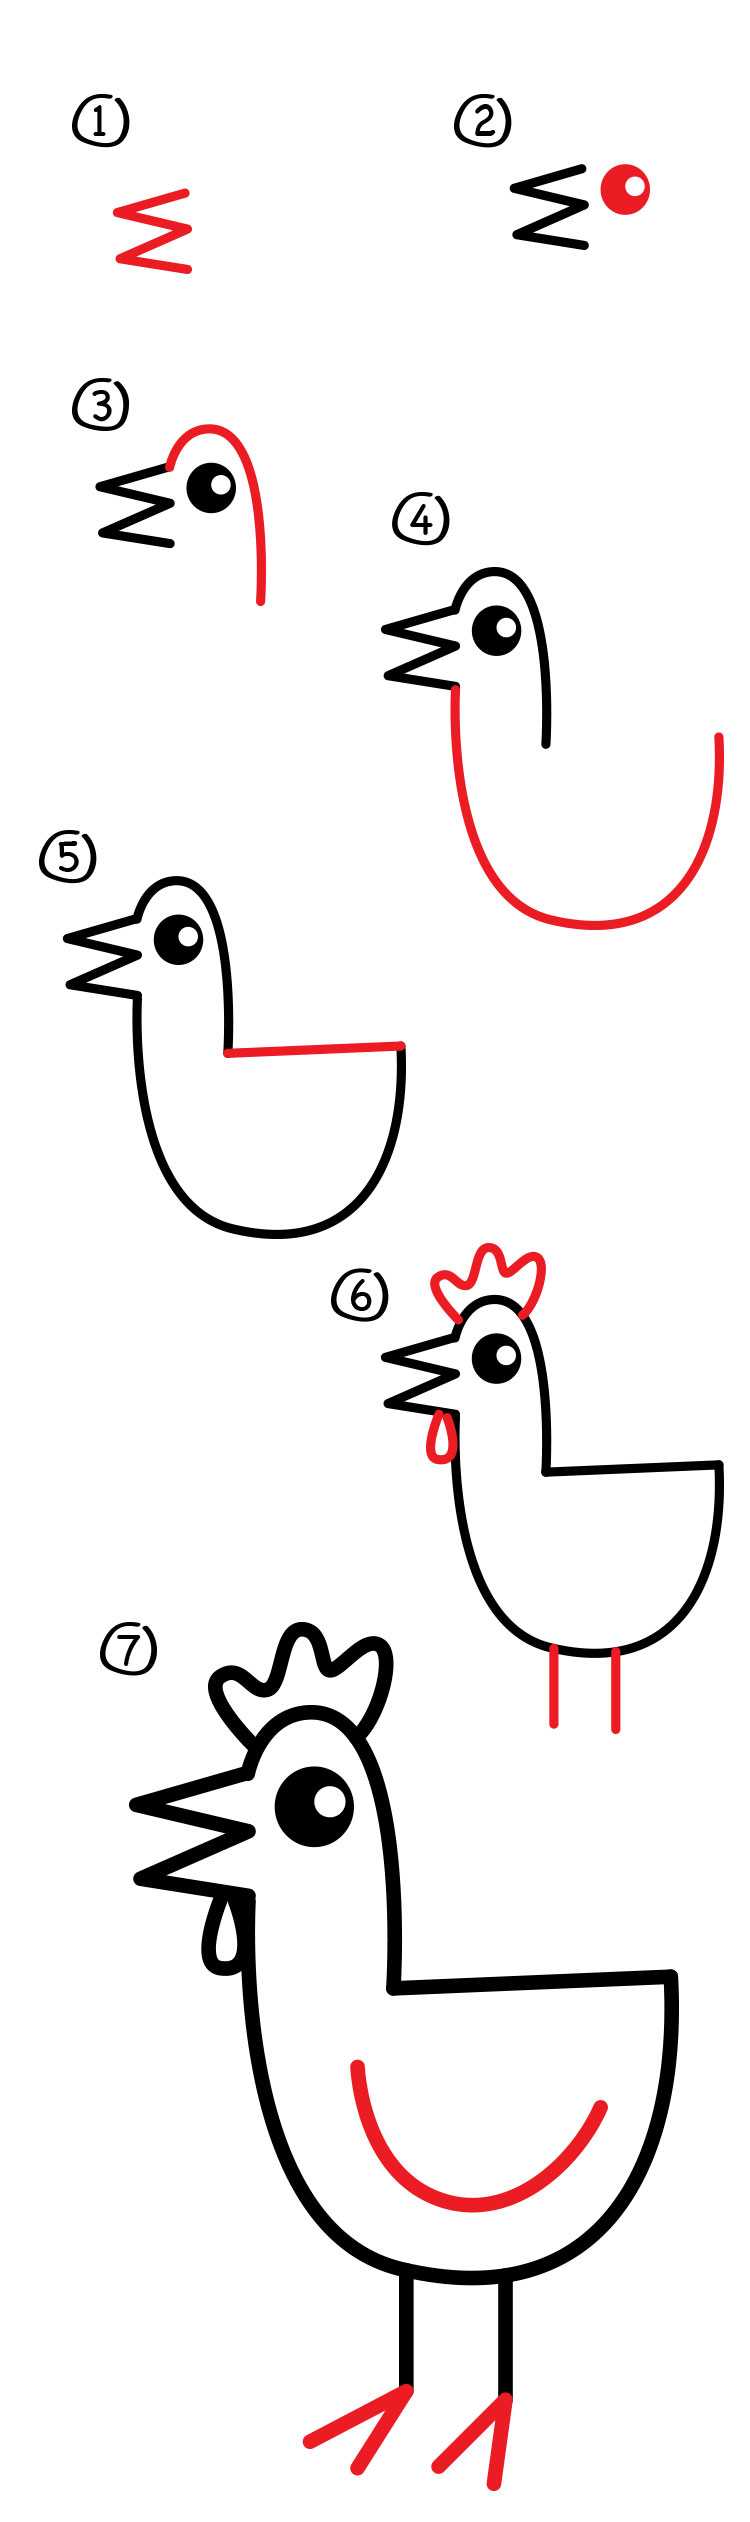 How To Draw A Chicken - Art For Kids Hub